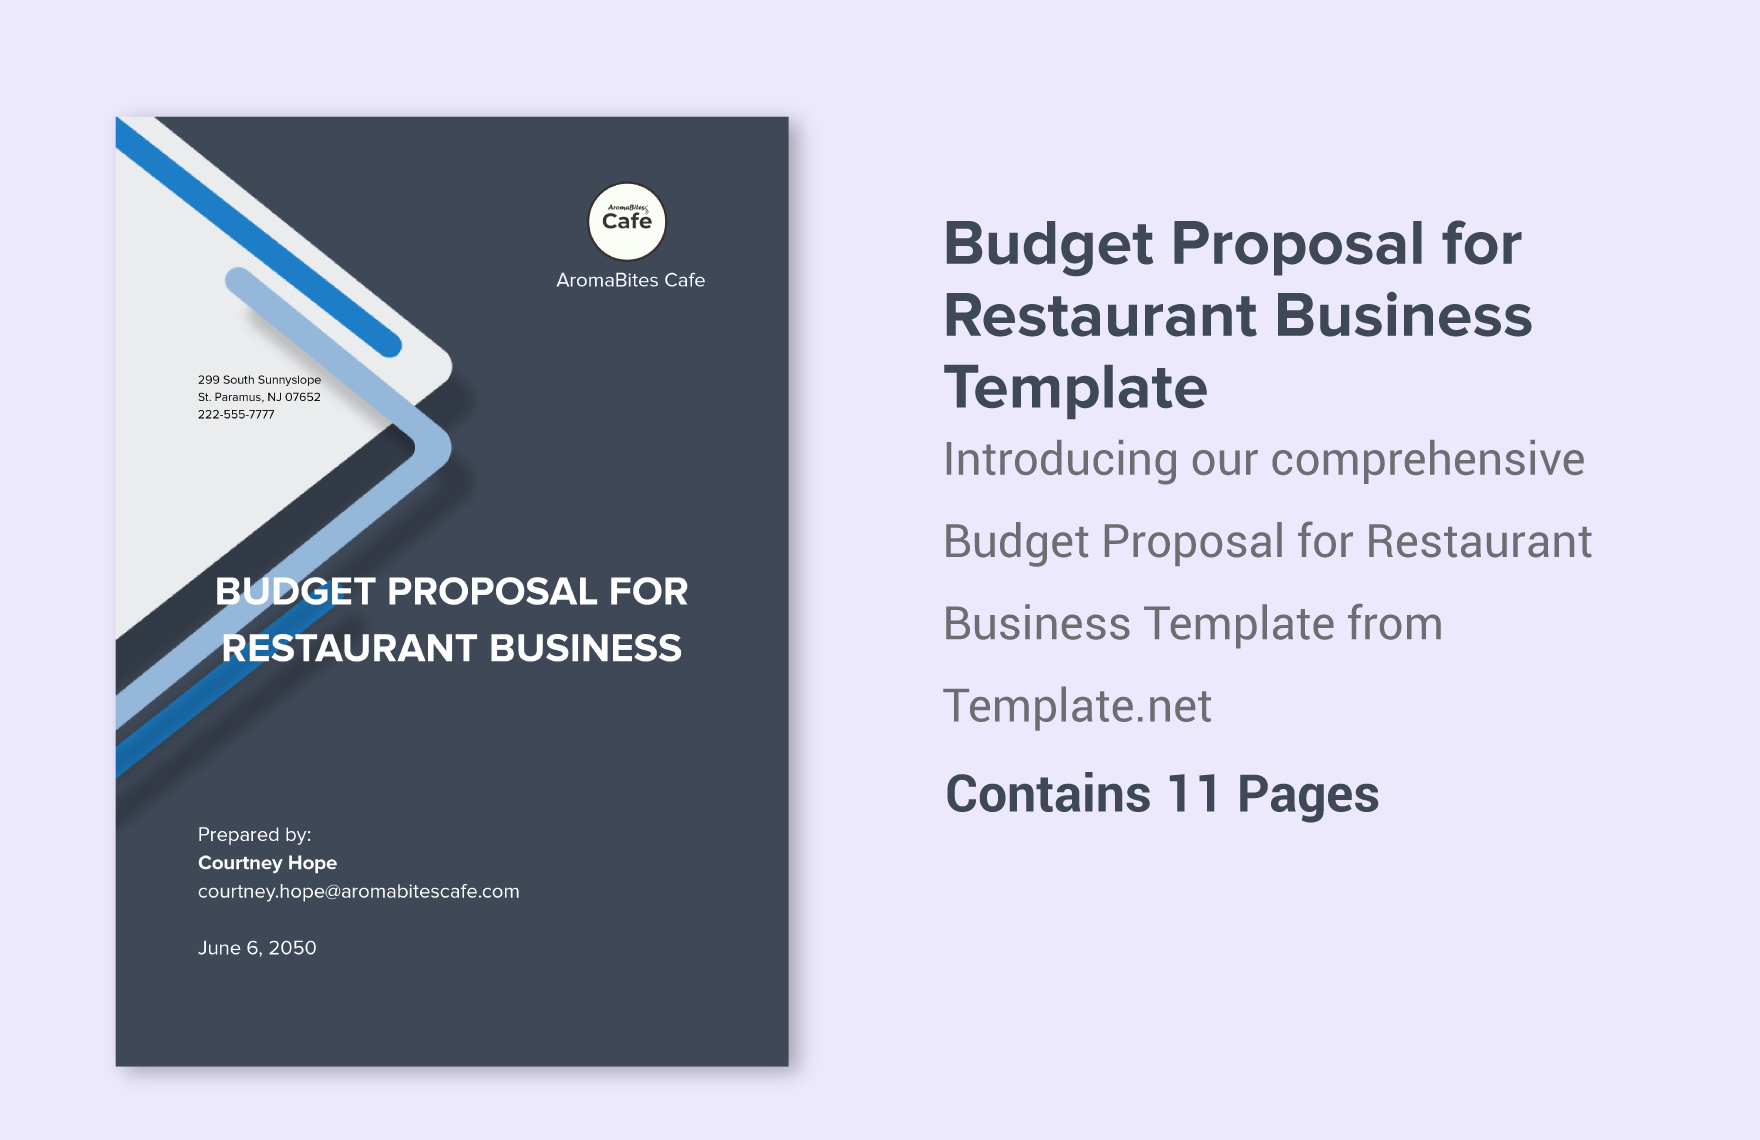 Budget Proposal for Restaurant Business Template